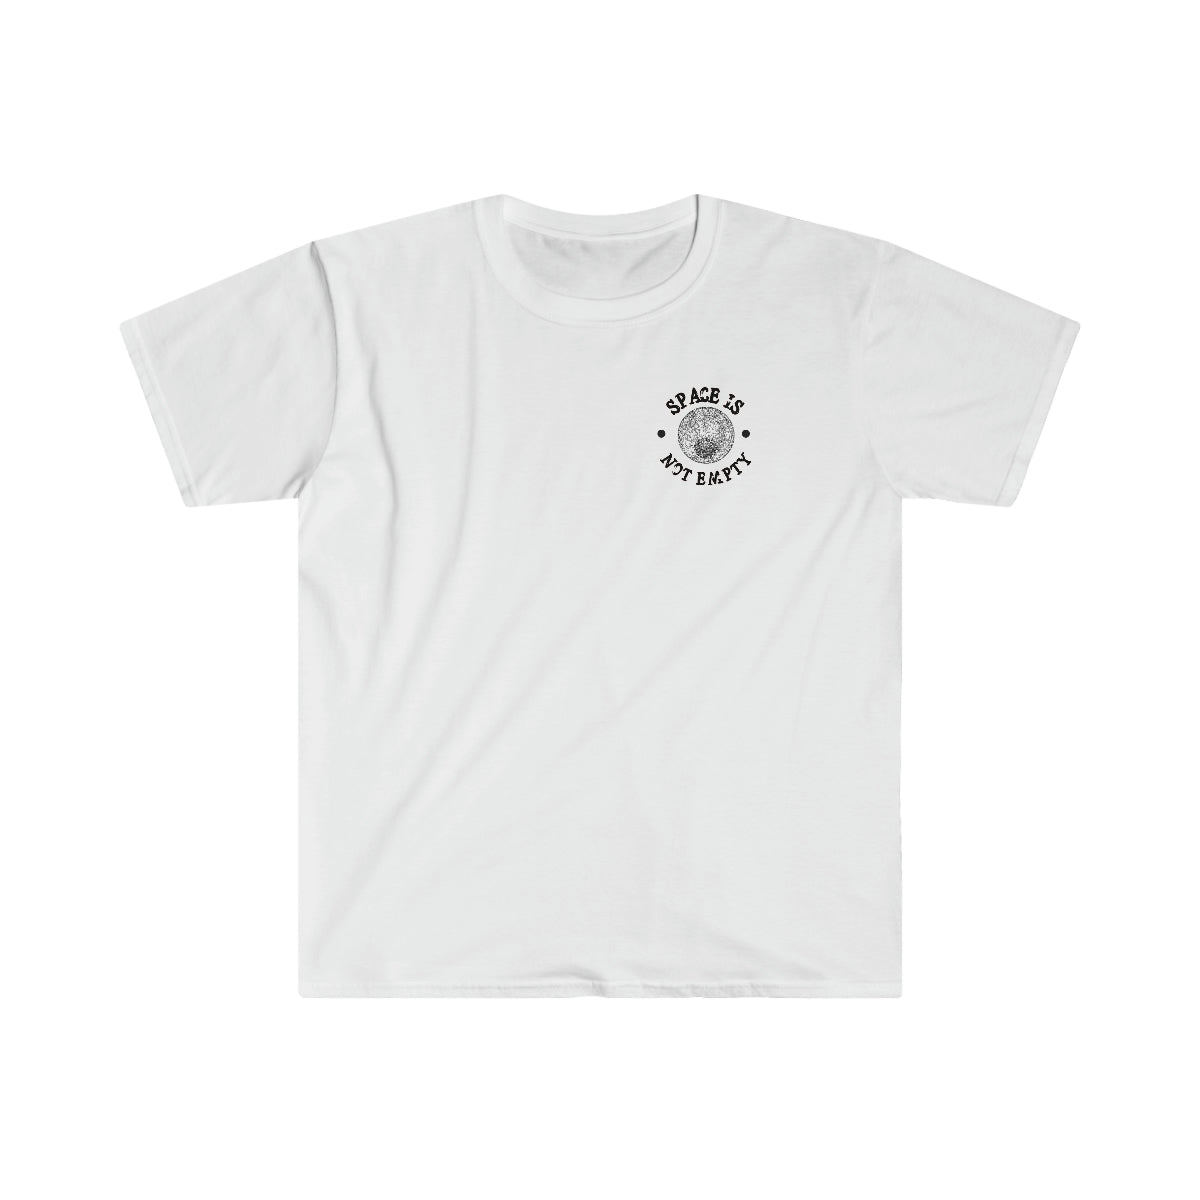 A Deep Space Shuttle white t-shirt with a black logo on it from One Tee Project.